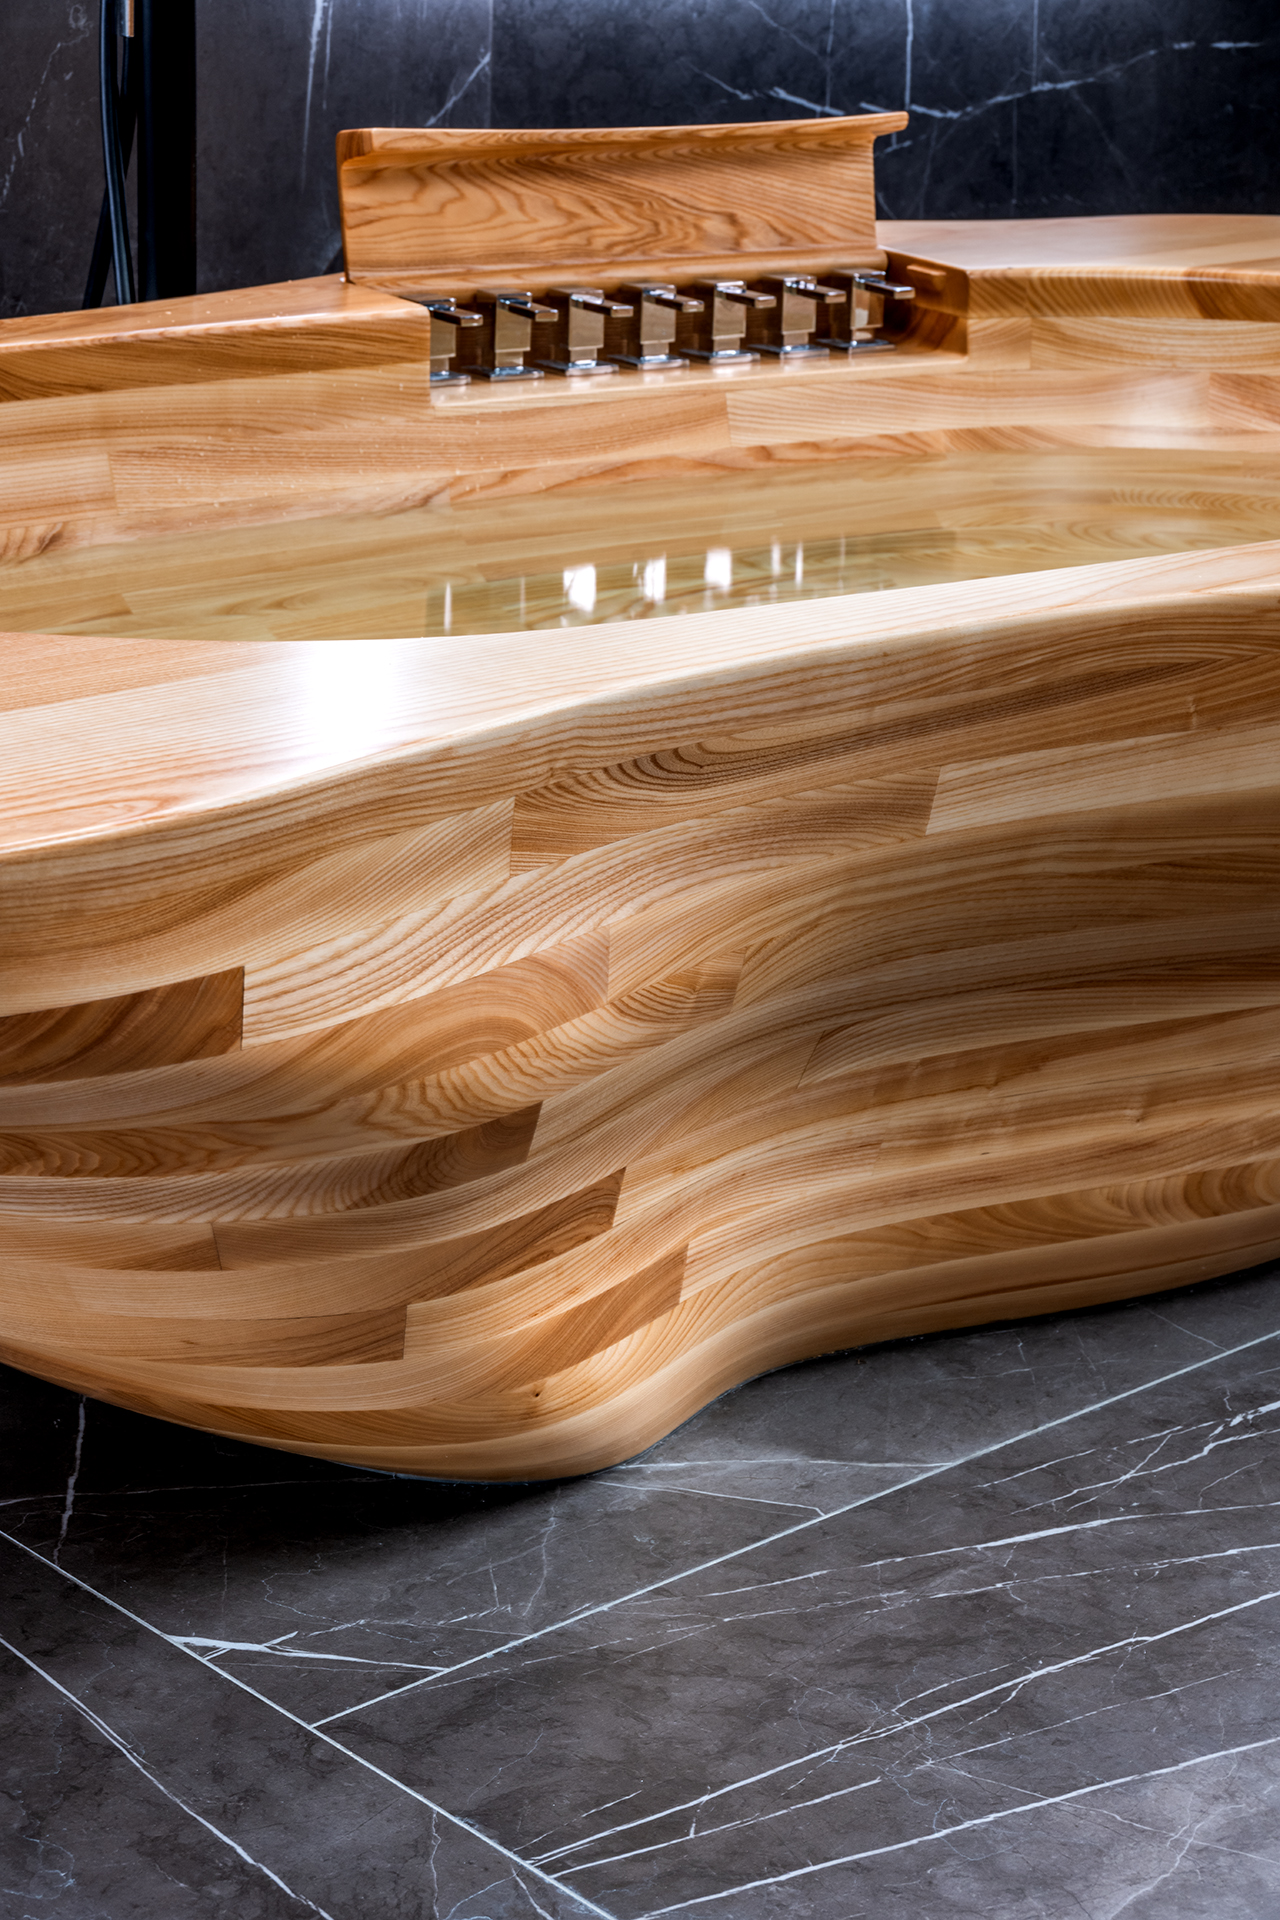 Image no. 5 of Custom bathtub and washbasin crafted in Ash wood - Defacto